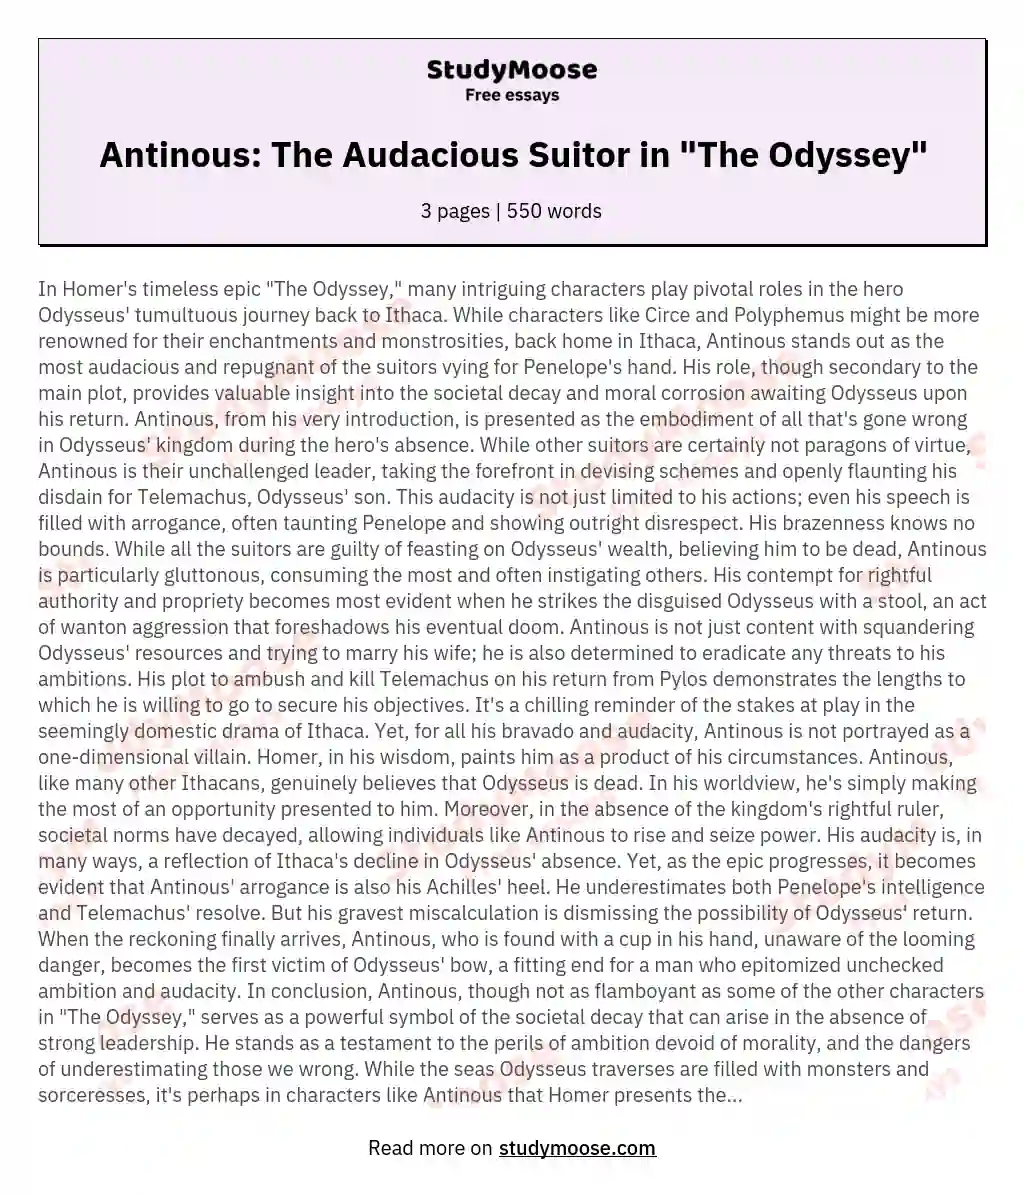 Antinous: The Audacious Suitor in "The Odyssey" essay